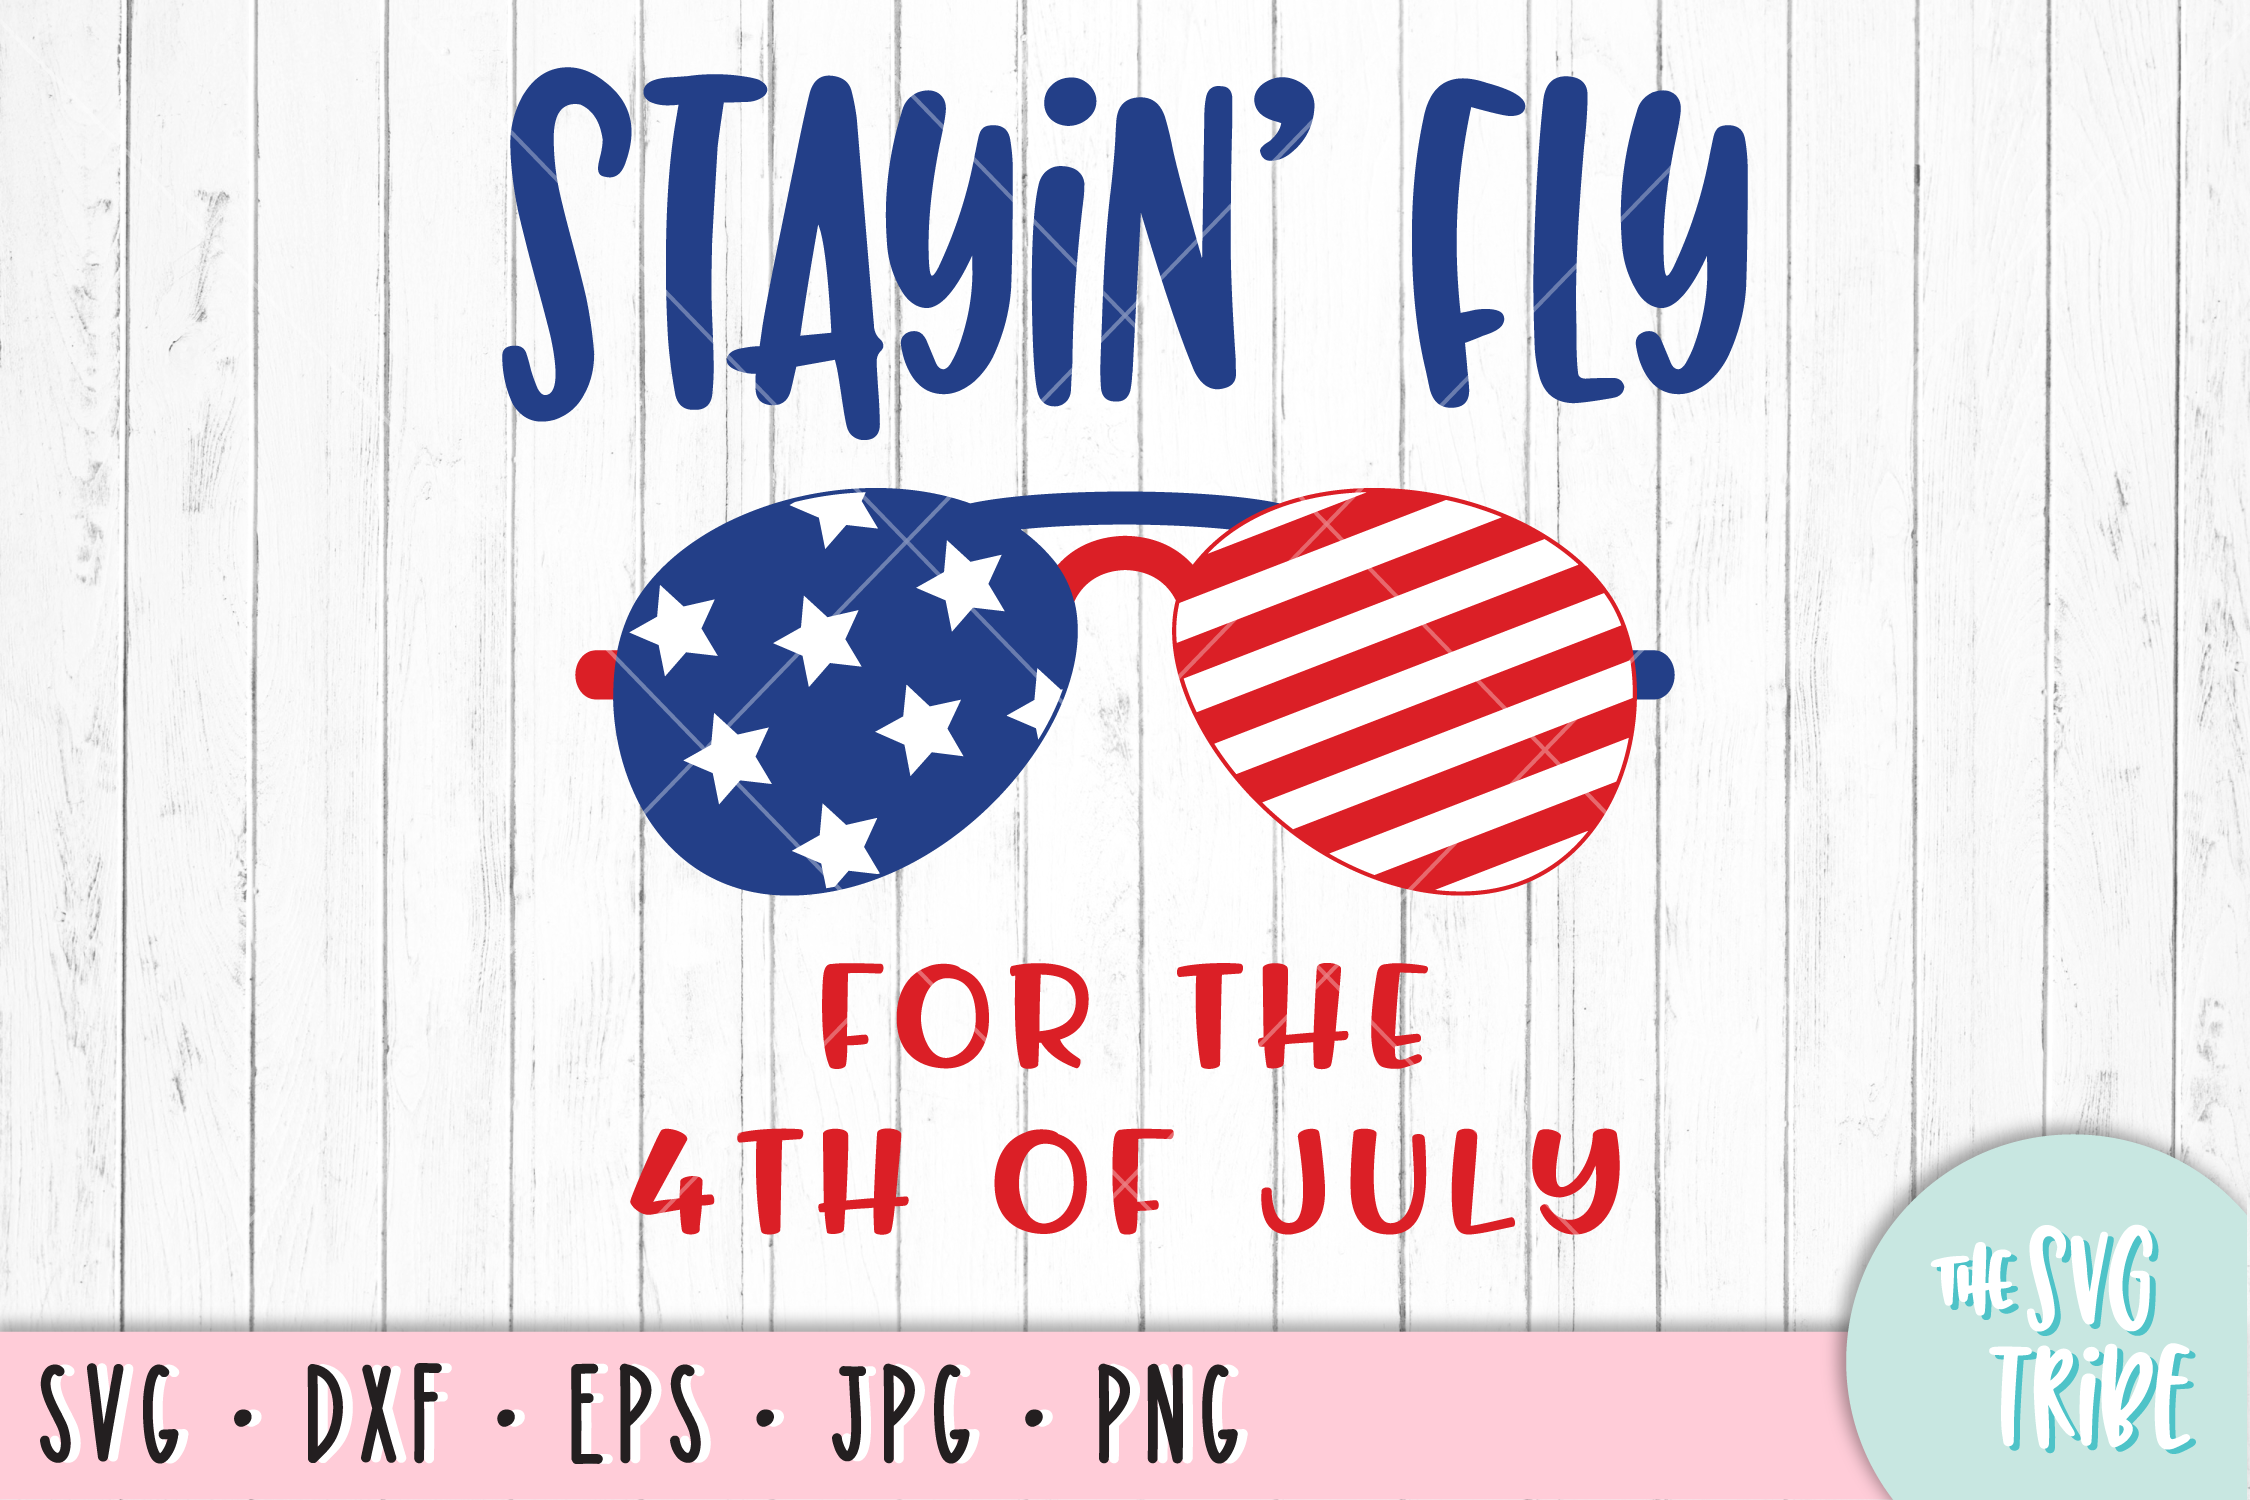 Download Stayin' Fly for the 4th of July SVG DXF PNG EPS JPG ...